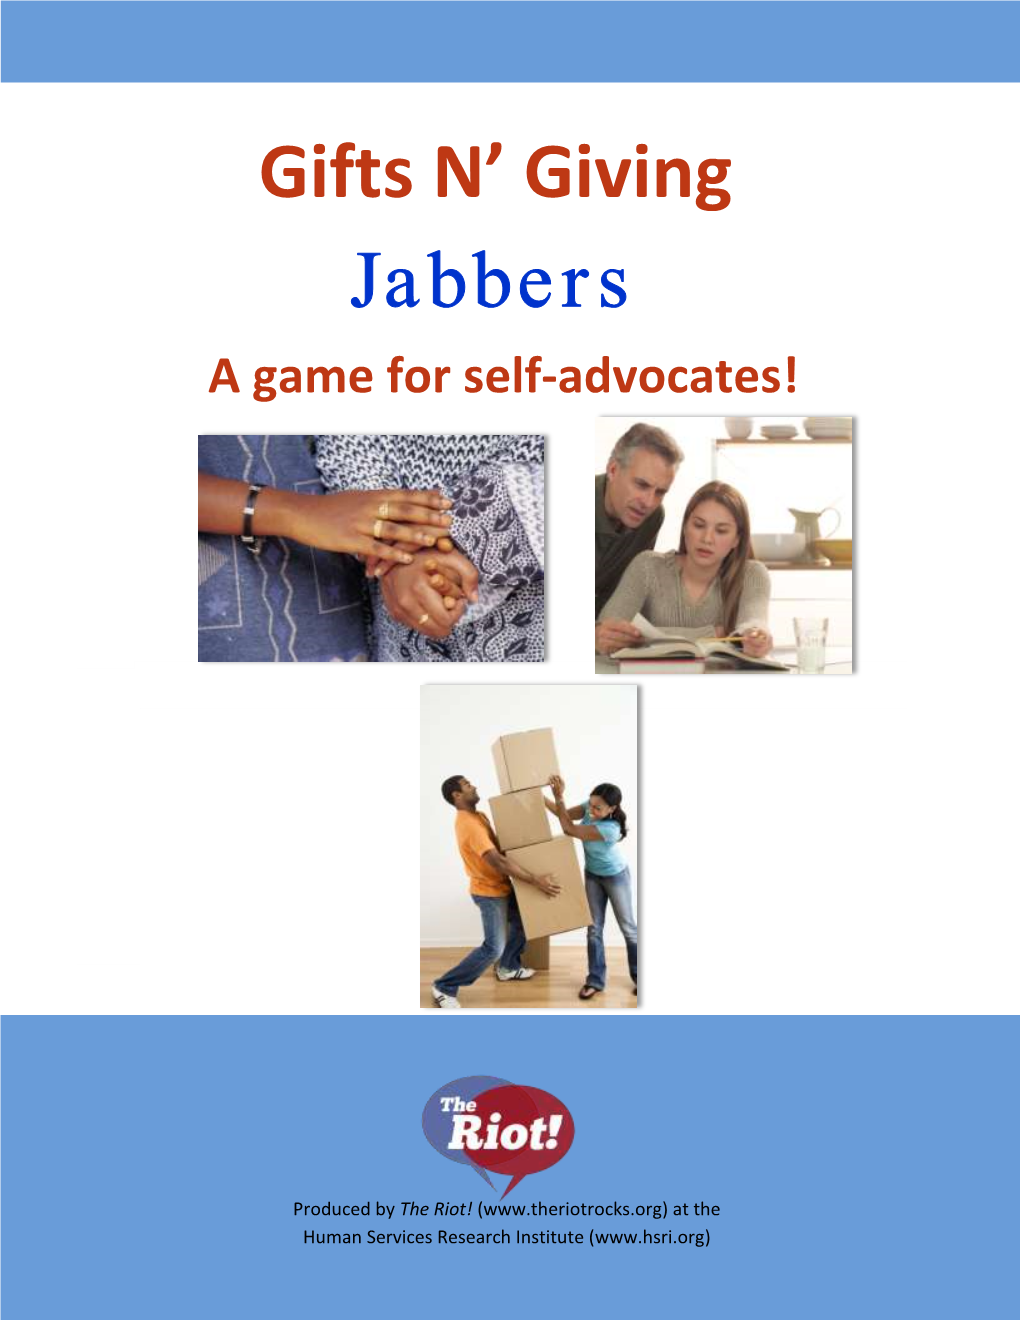 A Game for Self-Advocates!